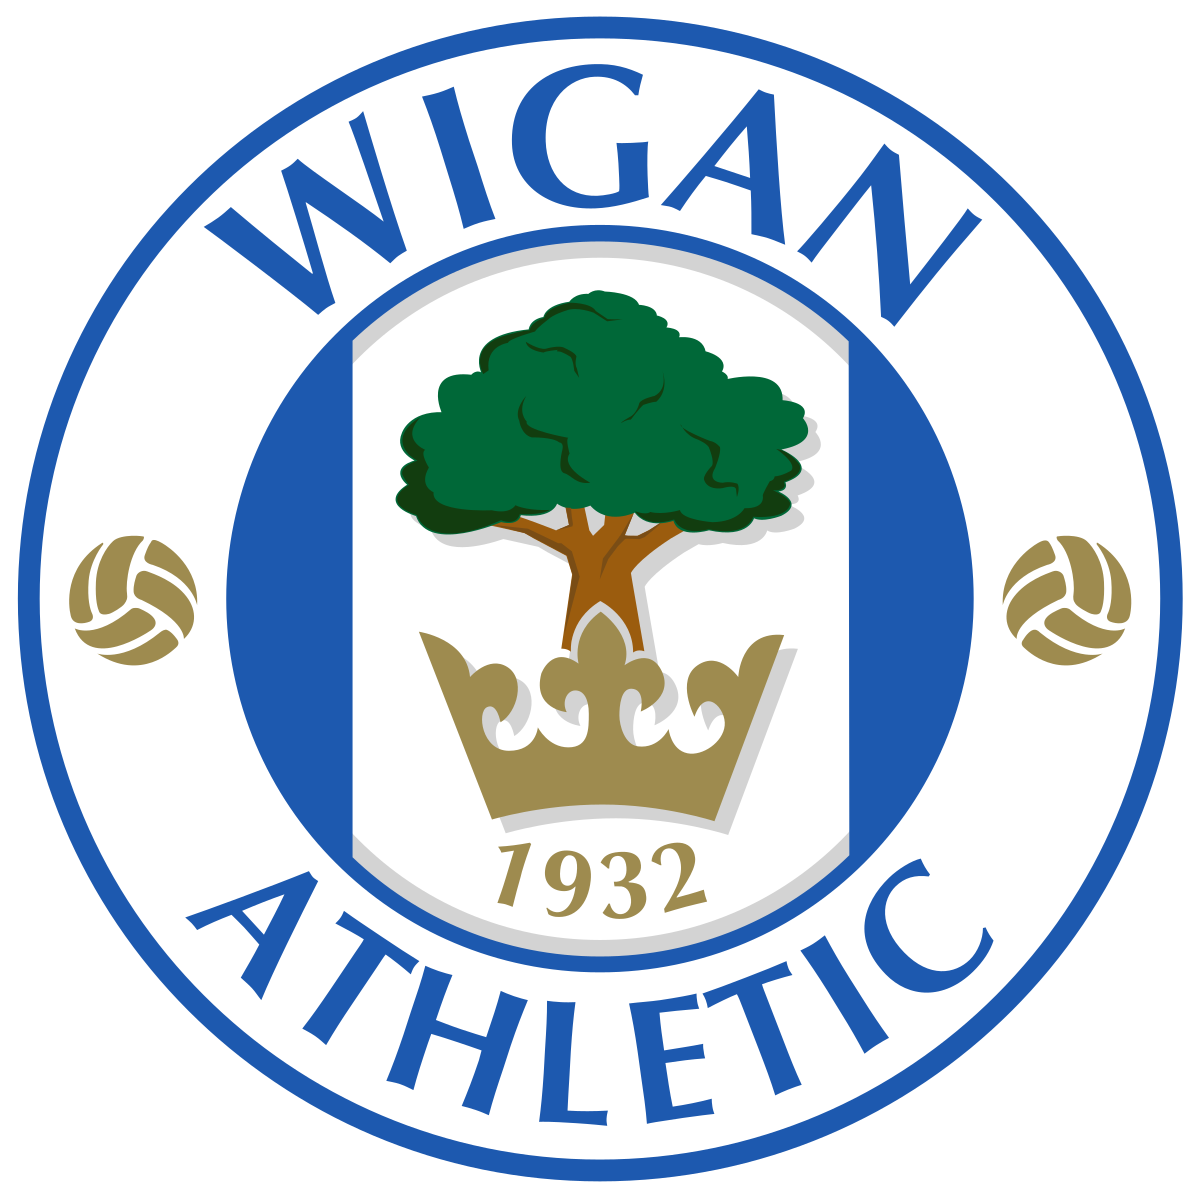 Wigan_Athletic.svg.png